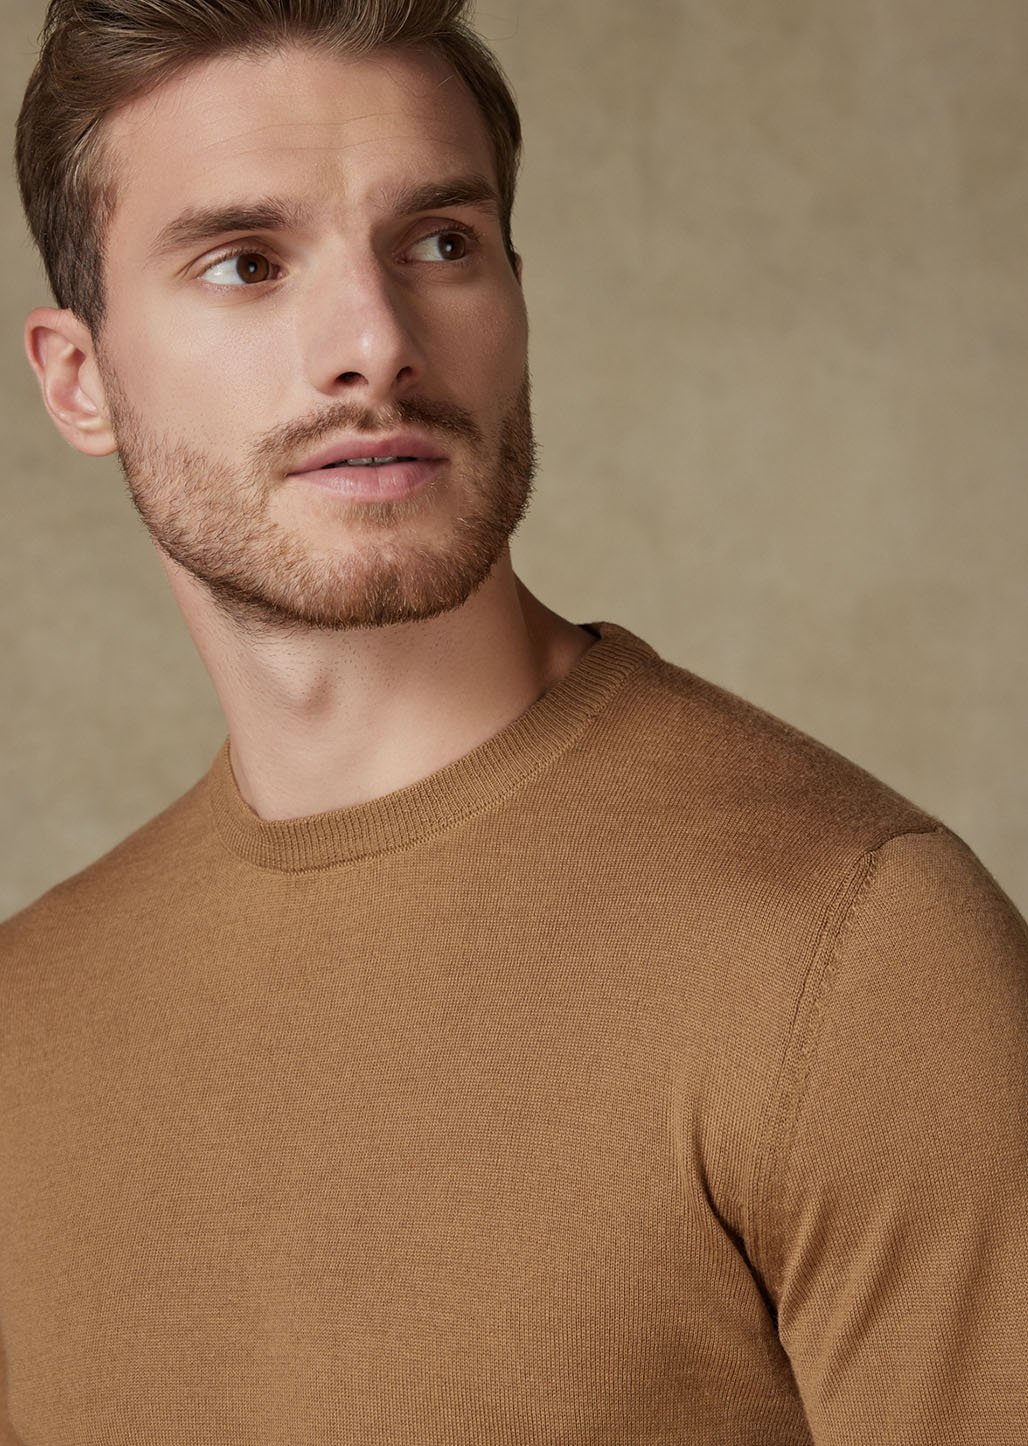 How to Combine a Polo Neck T-Shirt?